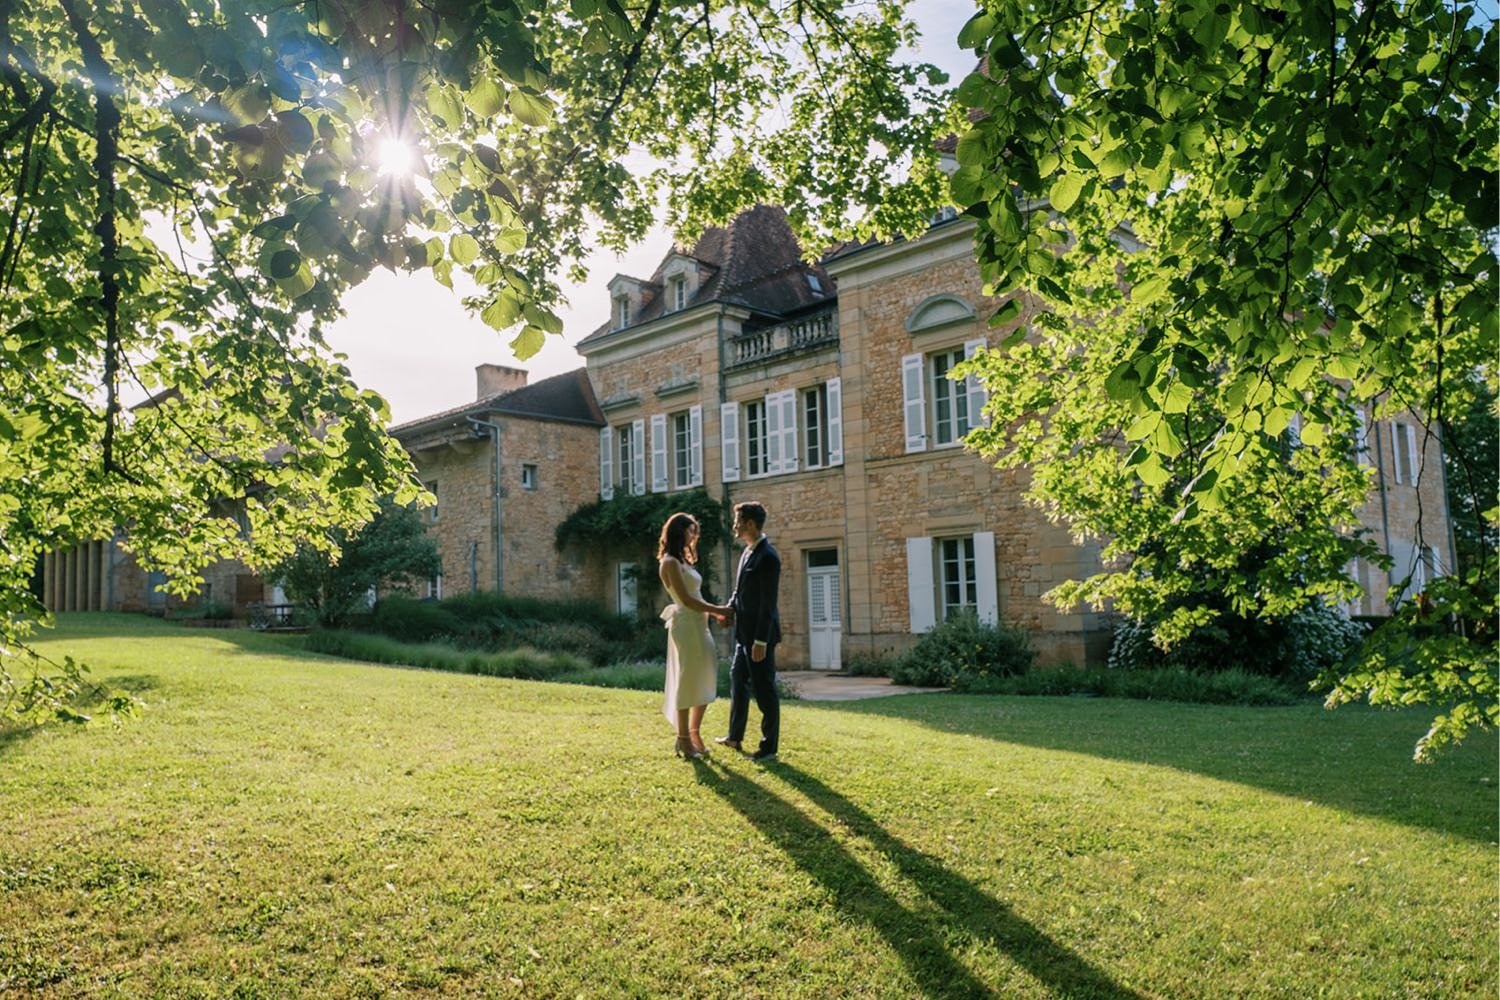 048_Intimate French chateau wedding at Chateau de Redon by top luxury destination photographer Ryan Flynn.jpg